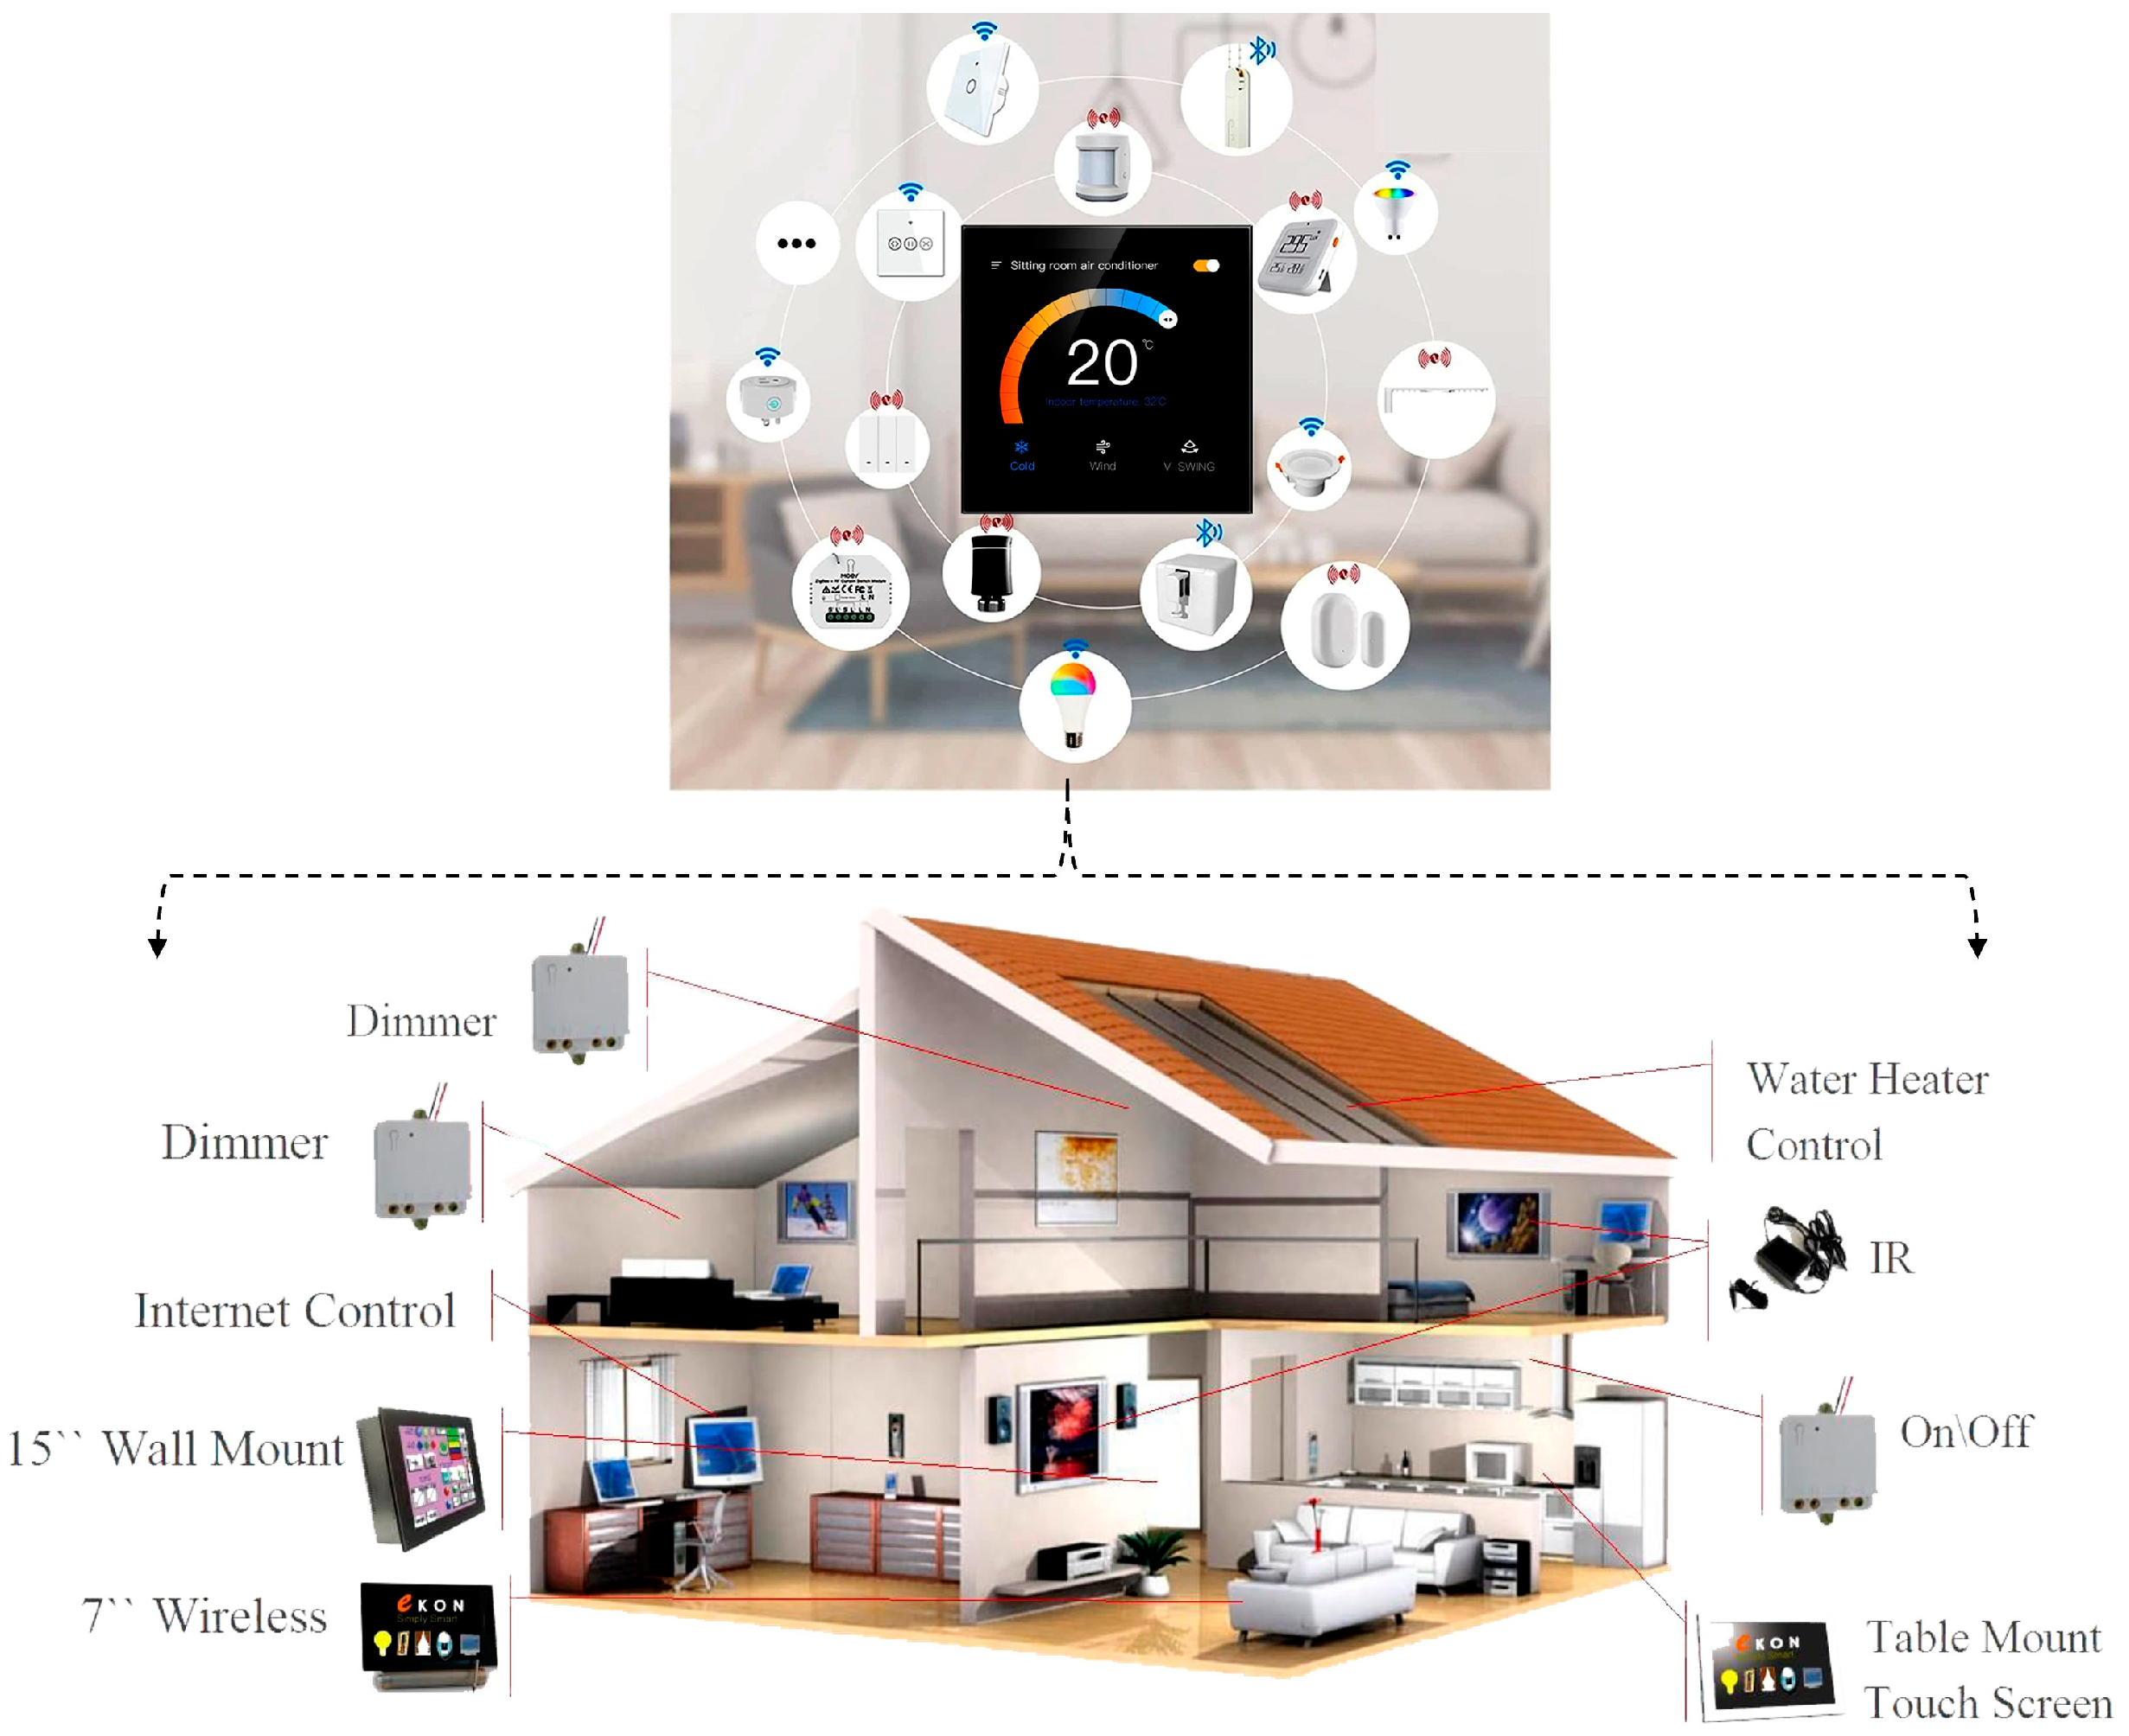 Energies | Free Full-Text | Enhancing Smart Home Design with AI Models: A  Case Study of Living Spaces Implementation Review